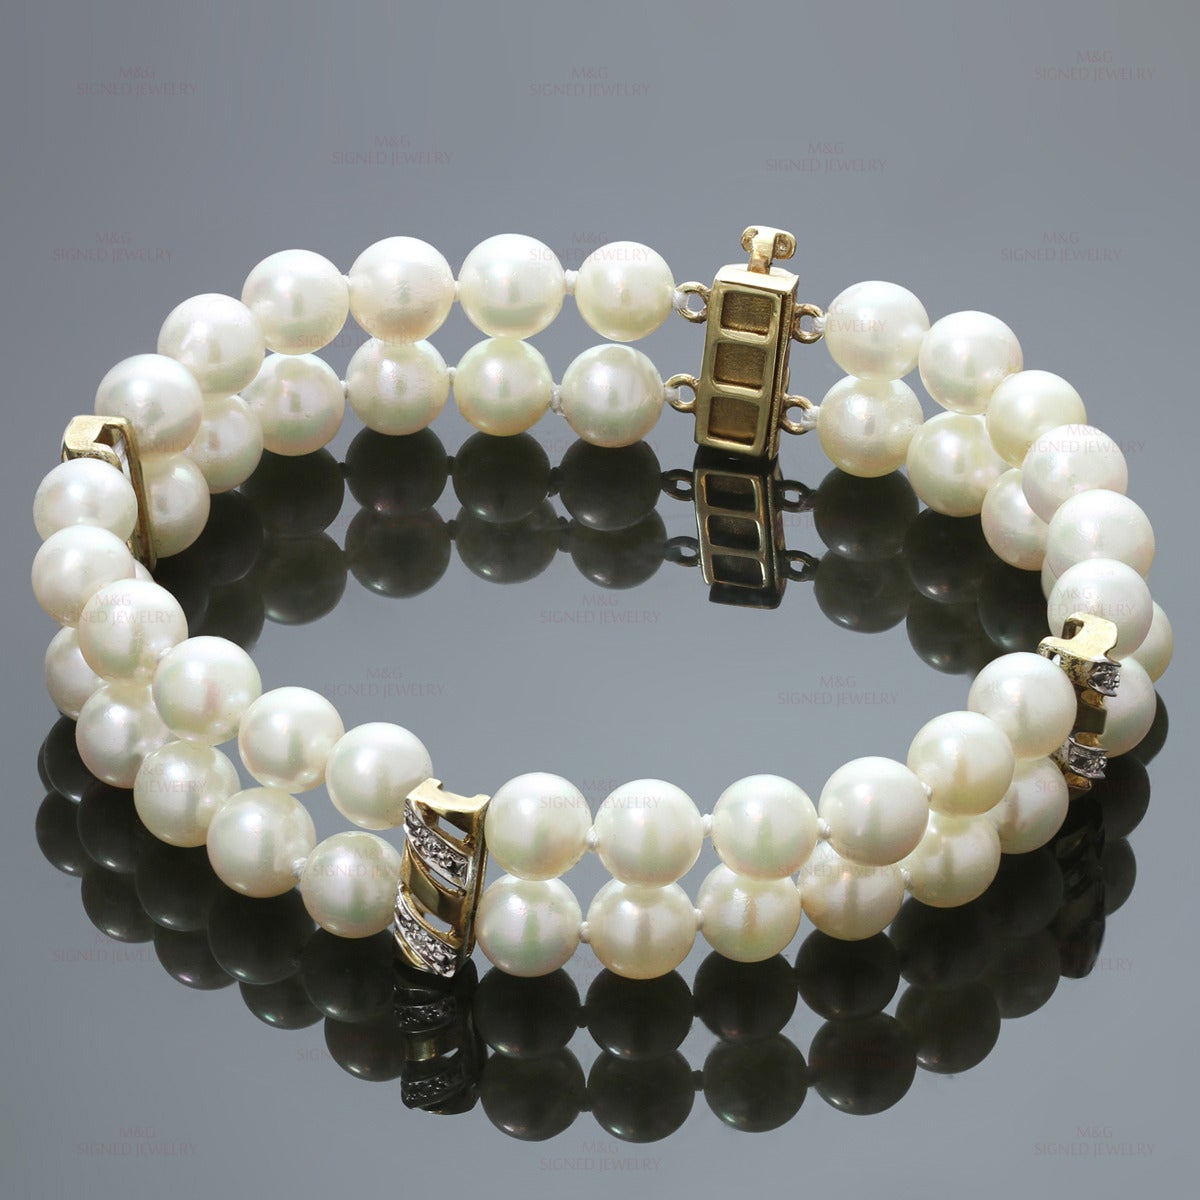 This modern bracelet features two strands of 6.0mm - 6.5mm cultured pearls accented with 14k yellow gold dividers and clasp set with round diamonds of an estimated 0.12 carats. Measurements: 0.47